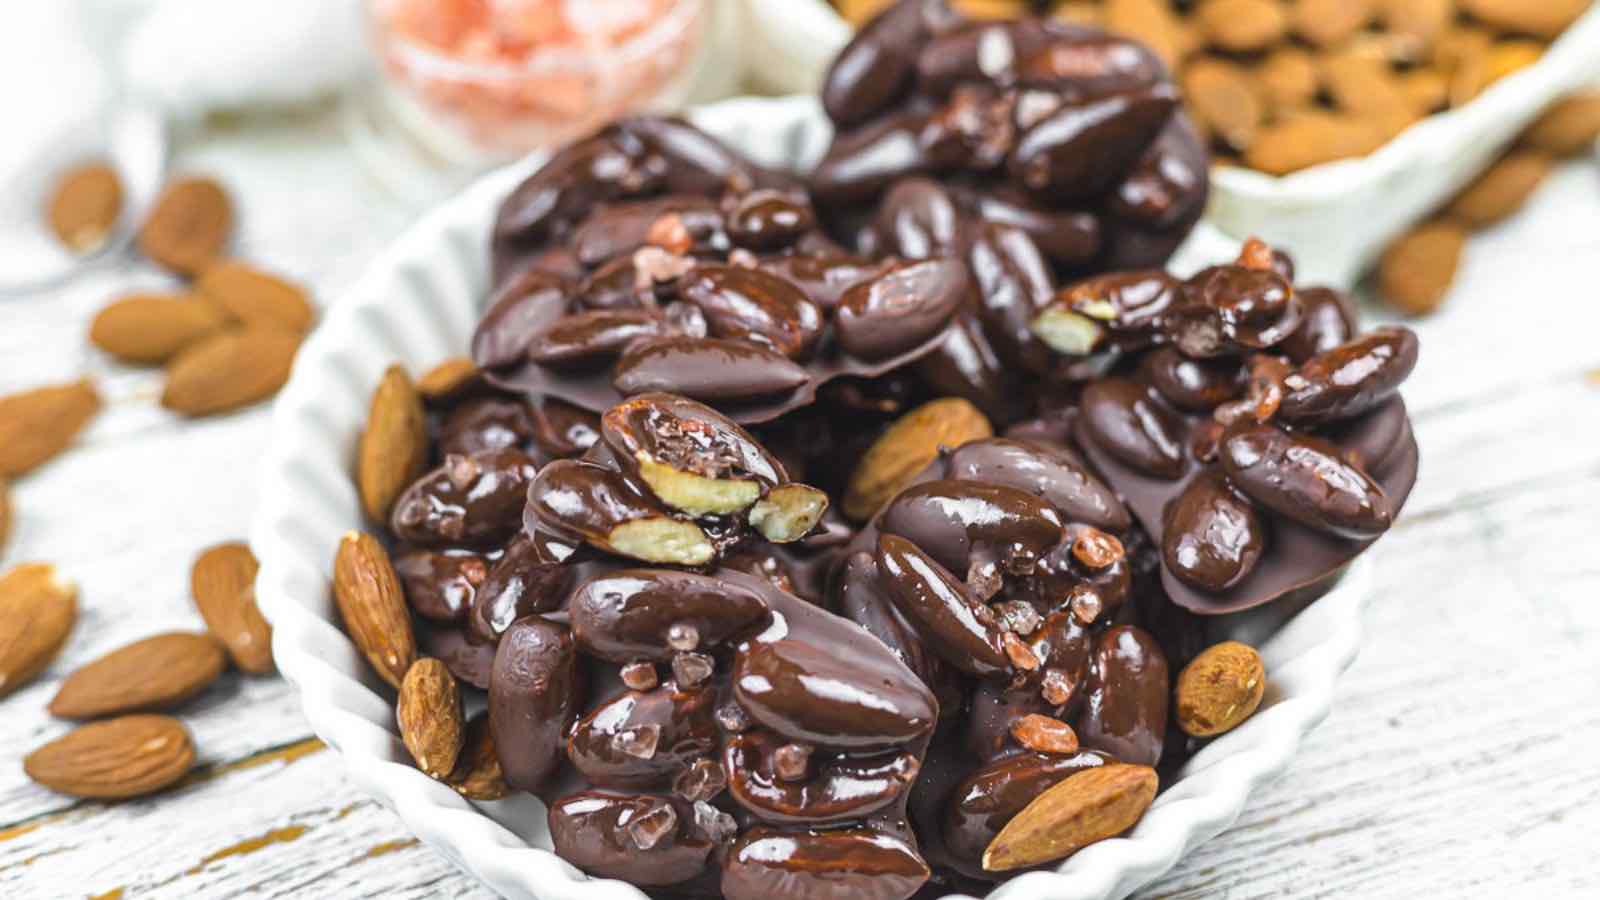 Chocolate covered almonds in a bowl on a wooden table.